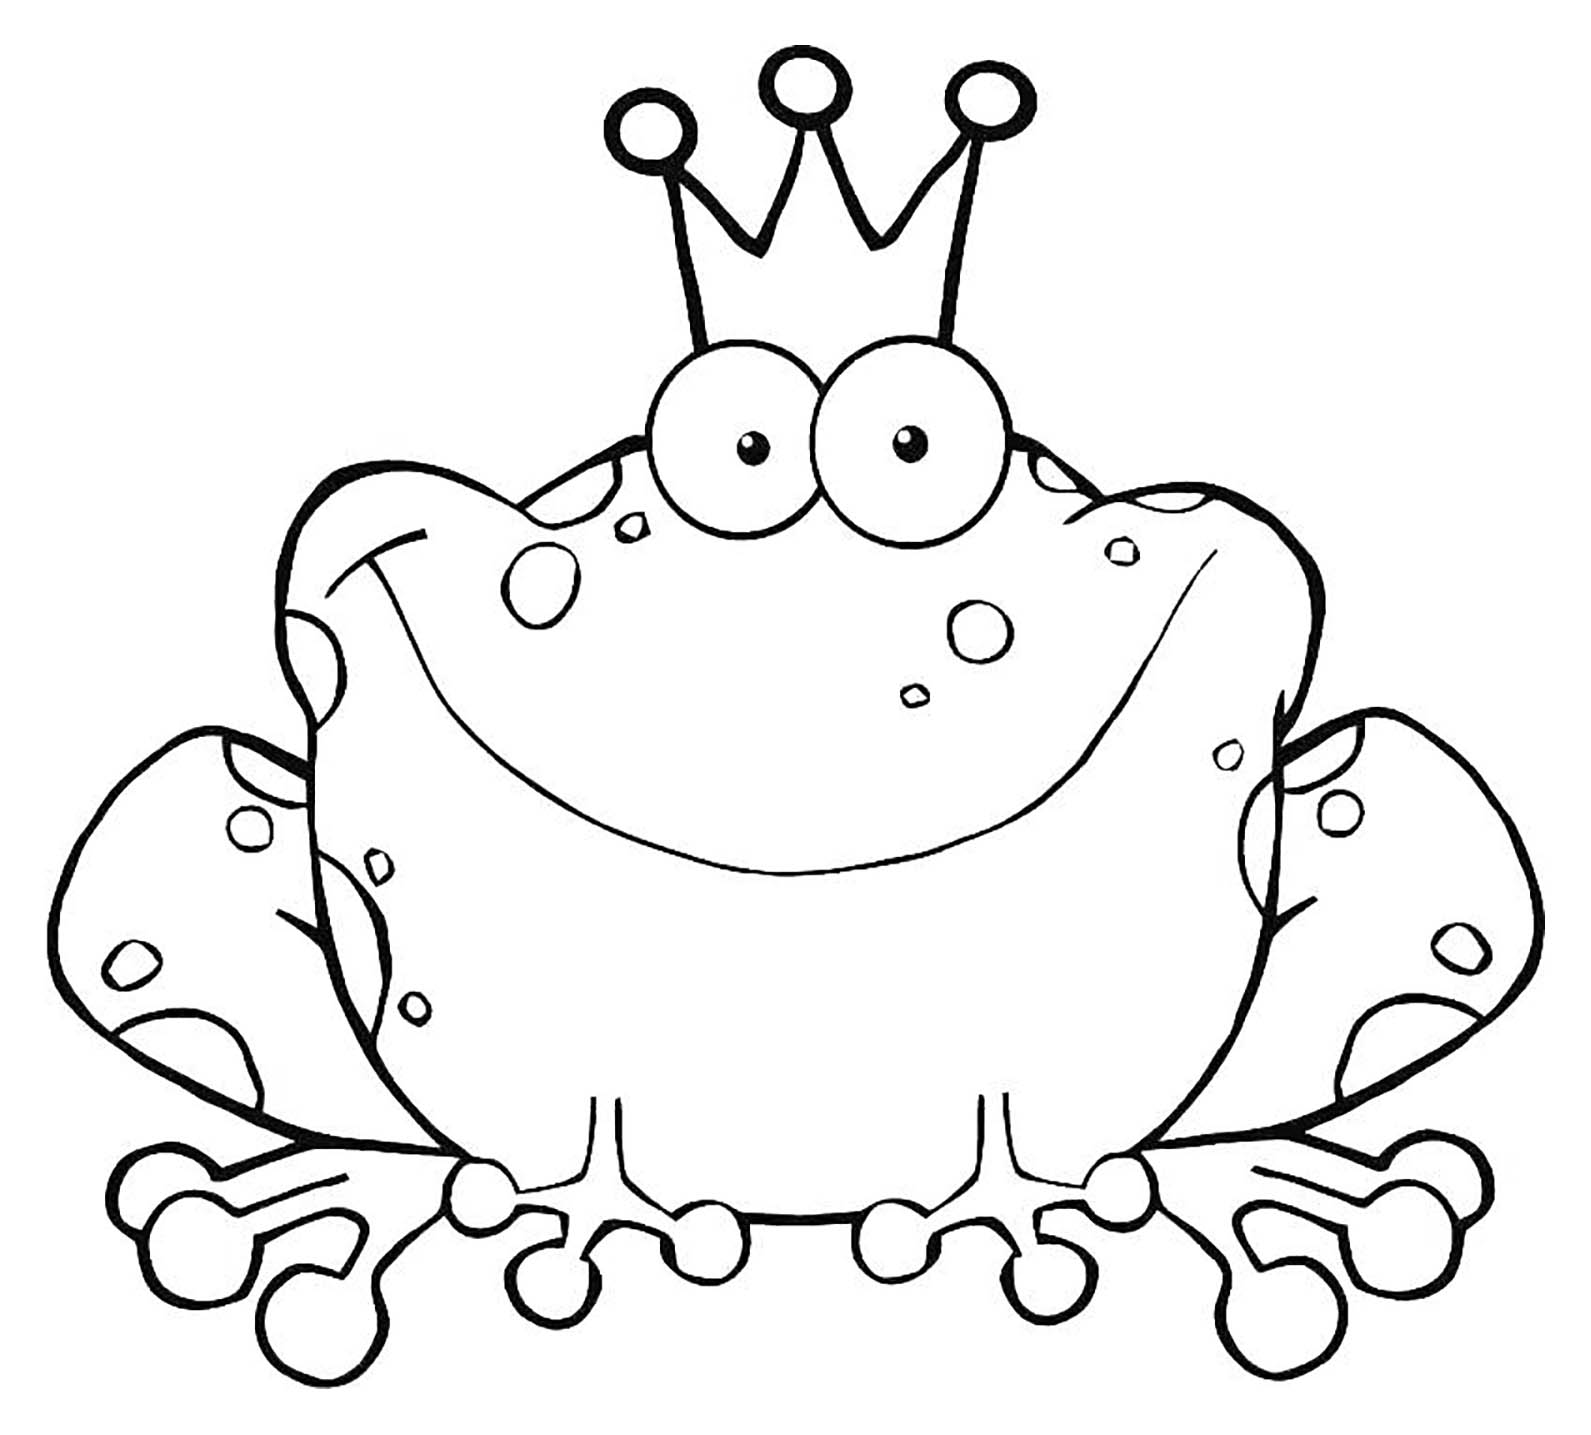 Frog drawing to download and print for children